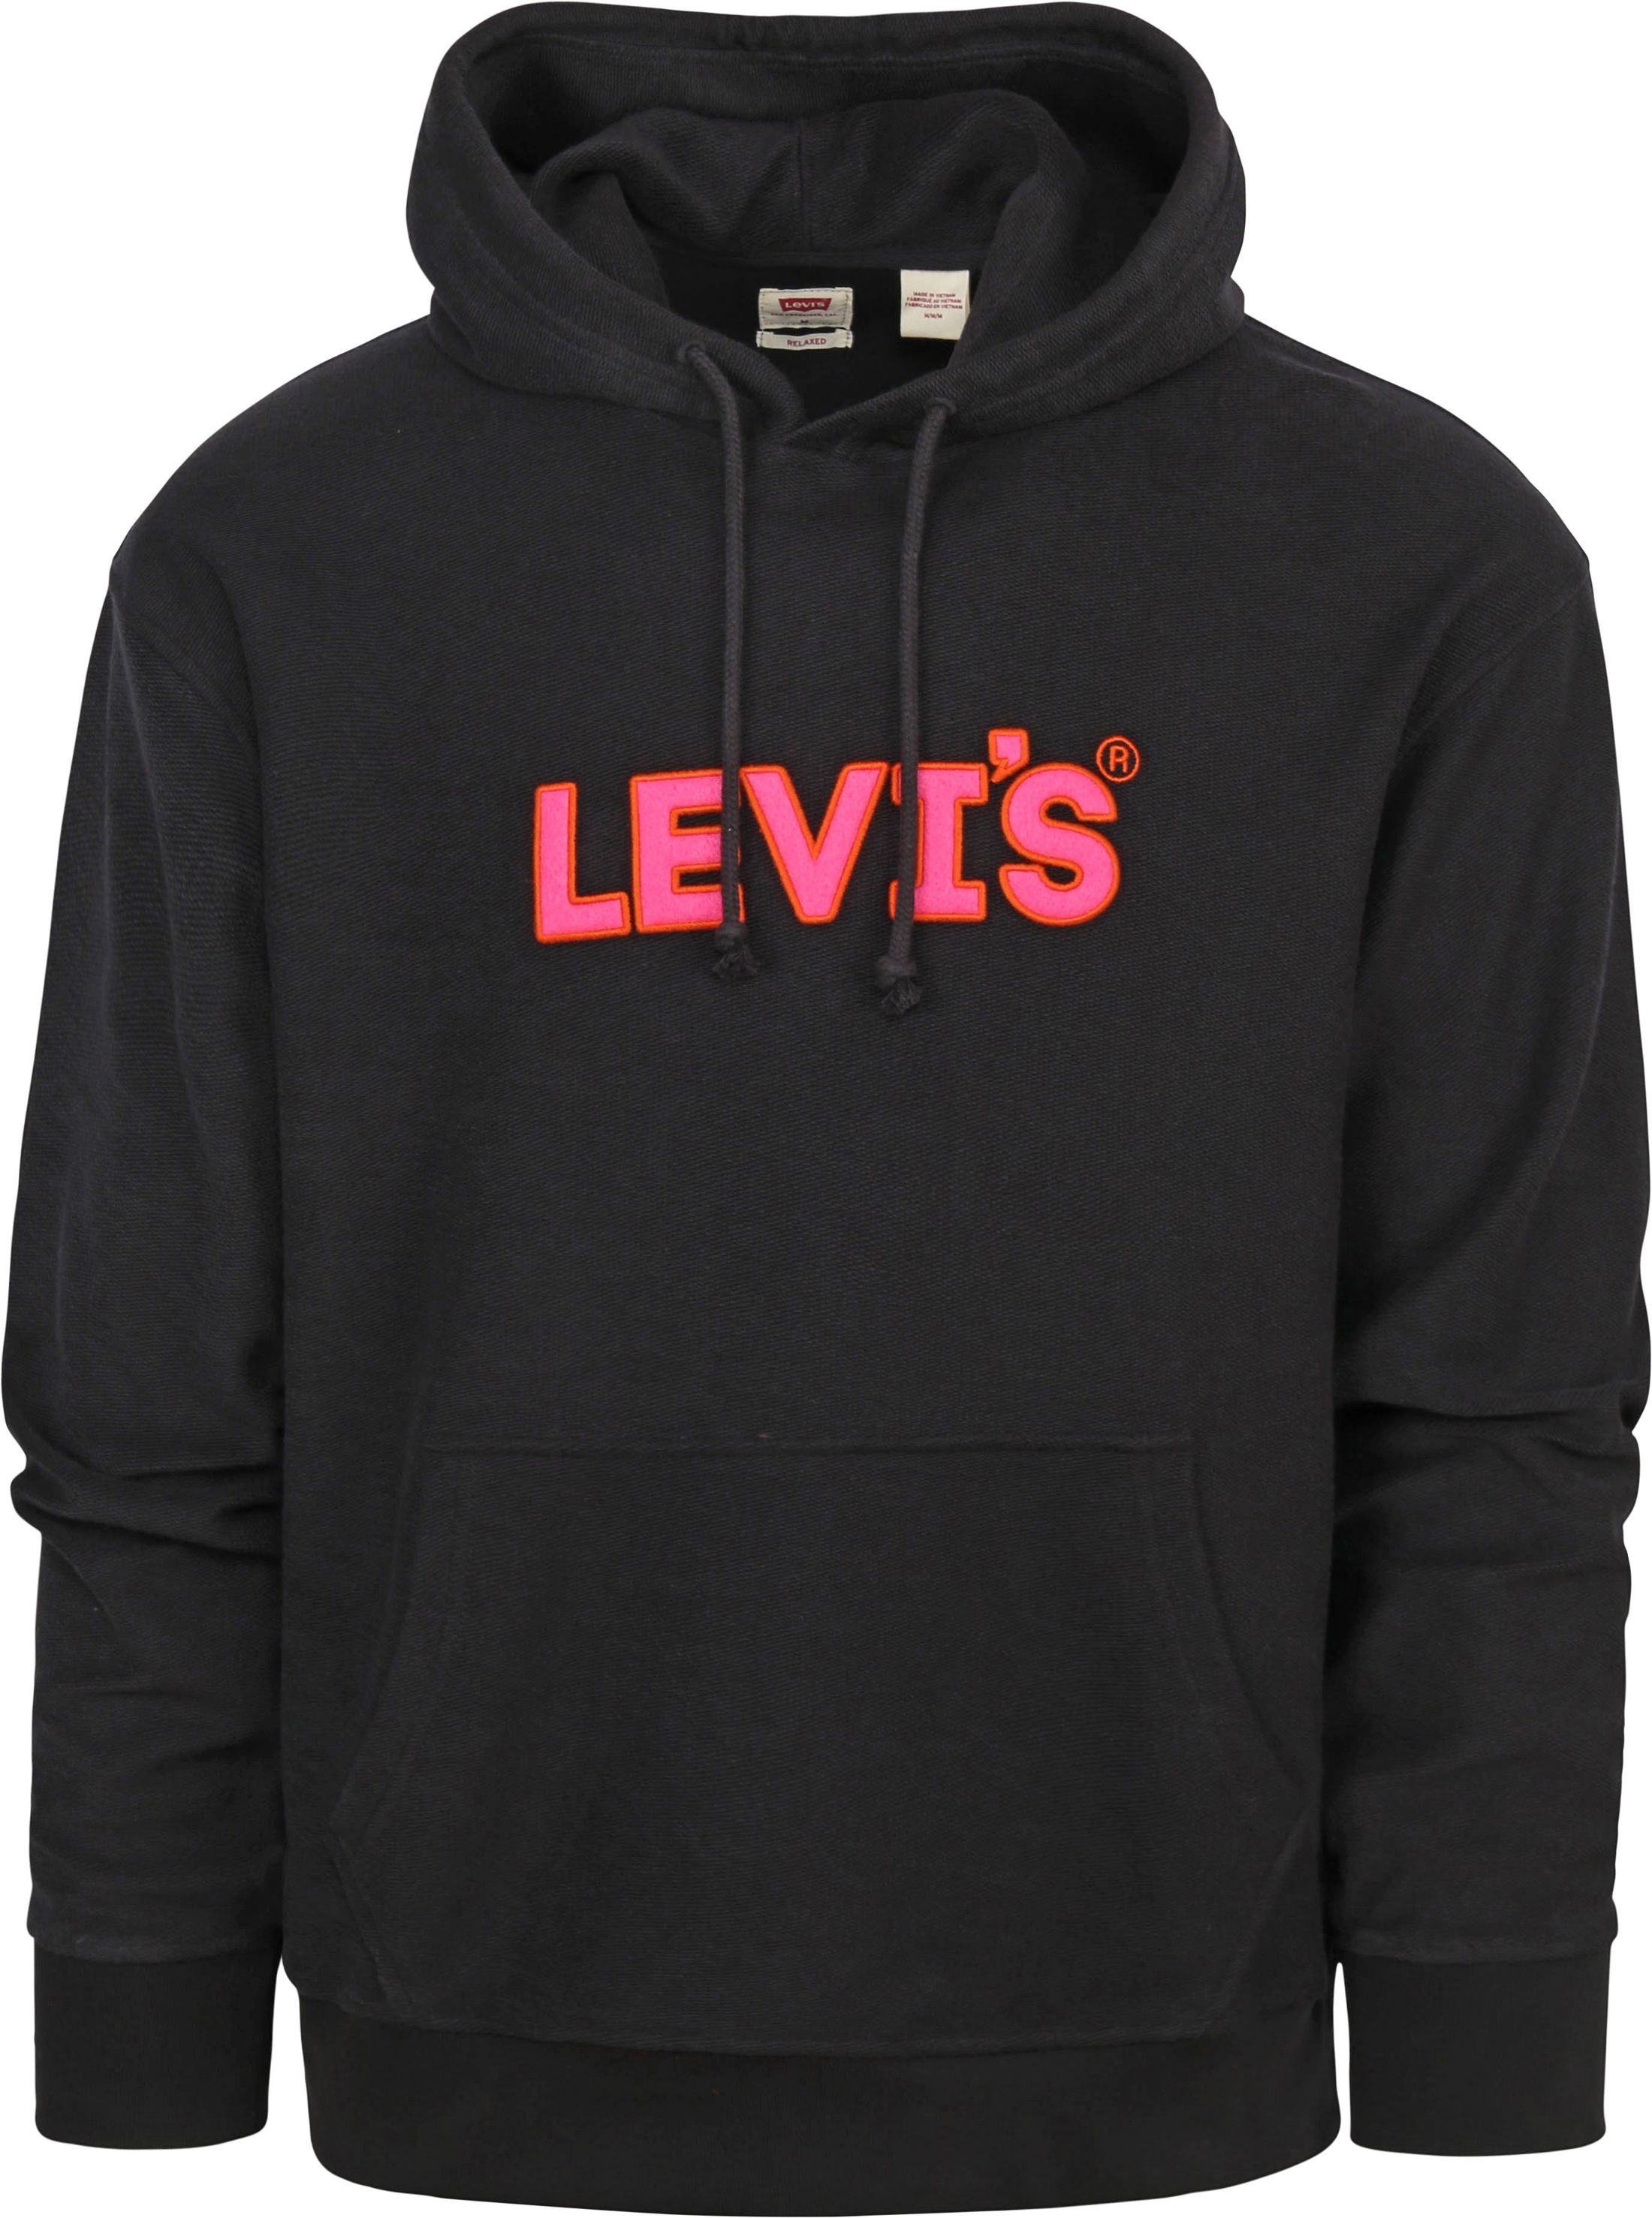 Levi's Hoodie Relaxed Black size XL product